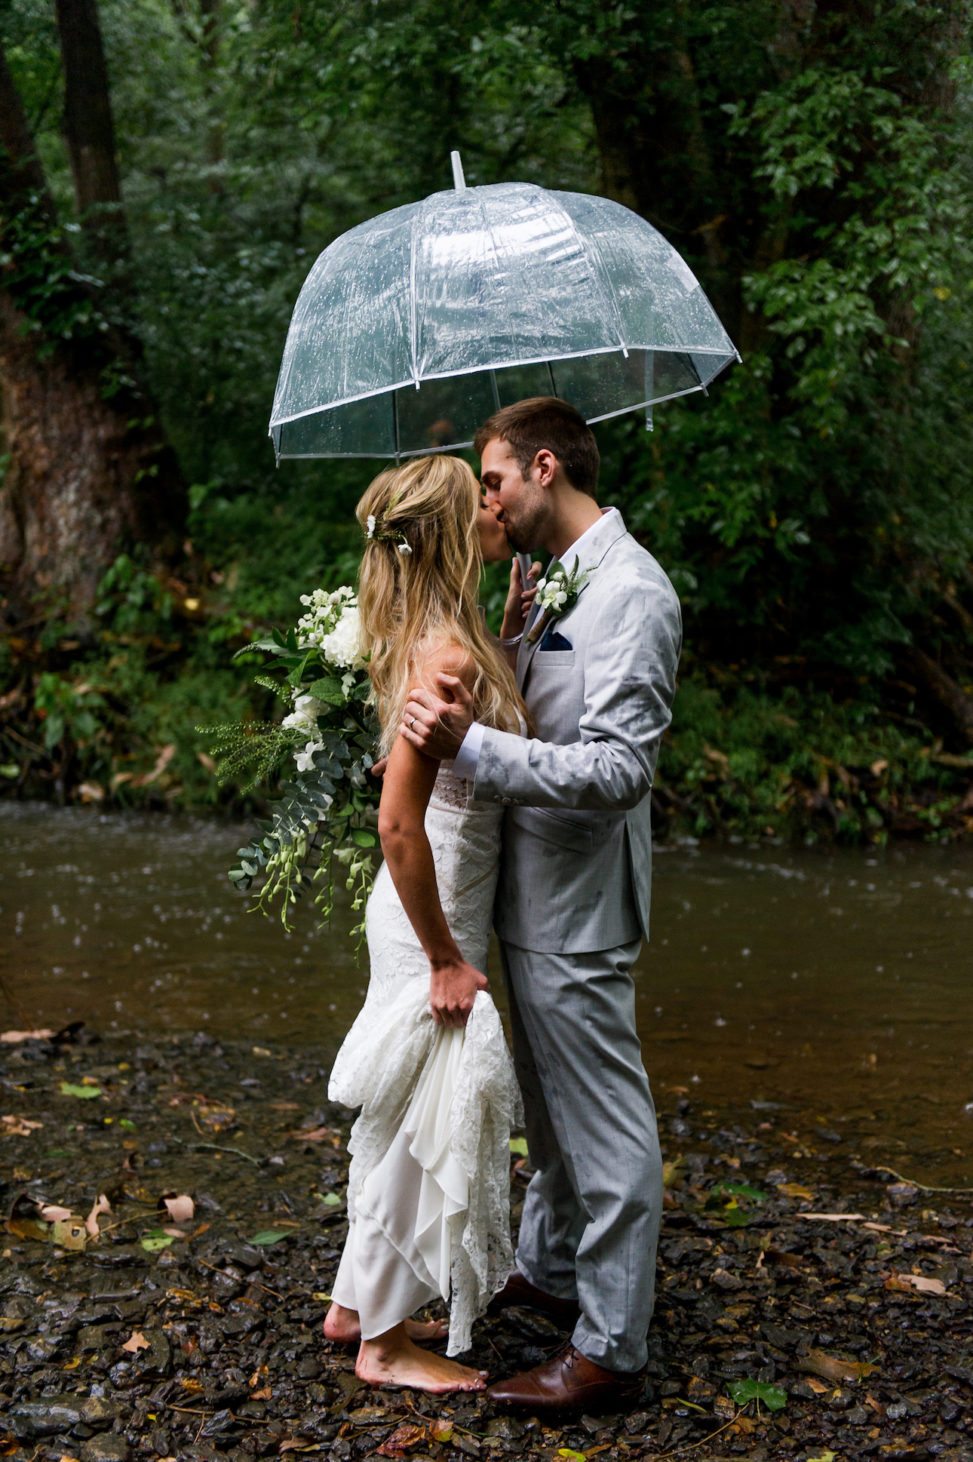 A man and woman kiss in the rain